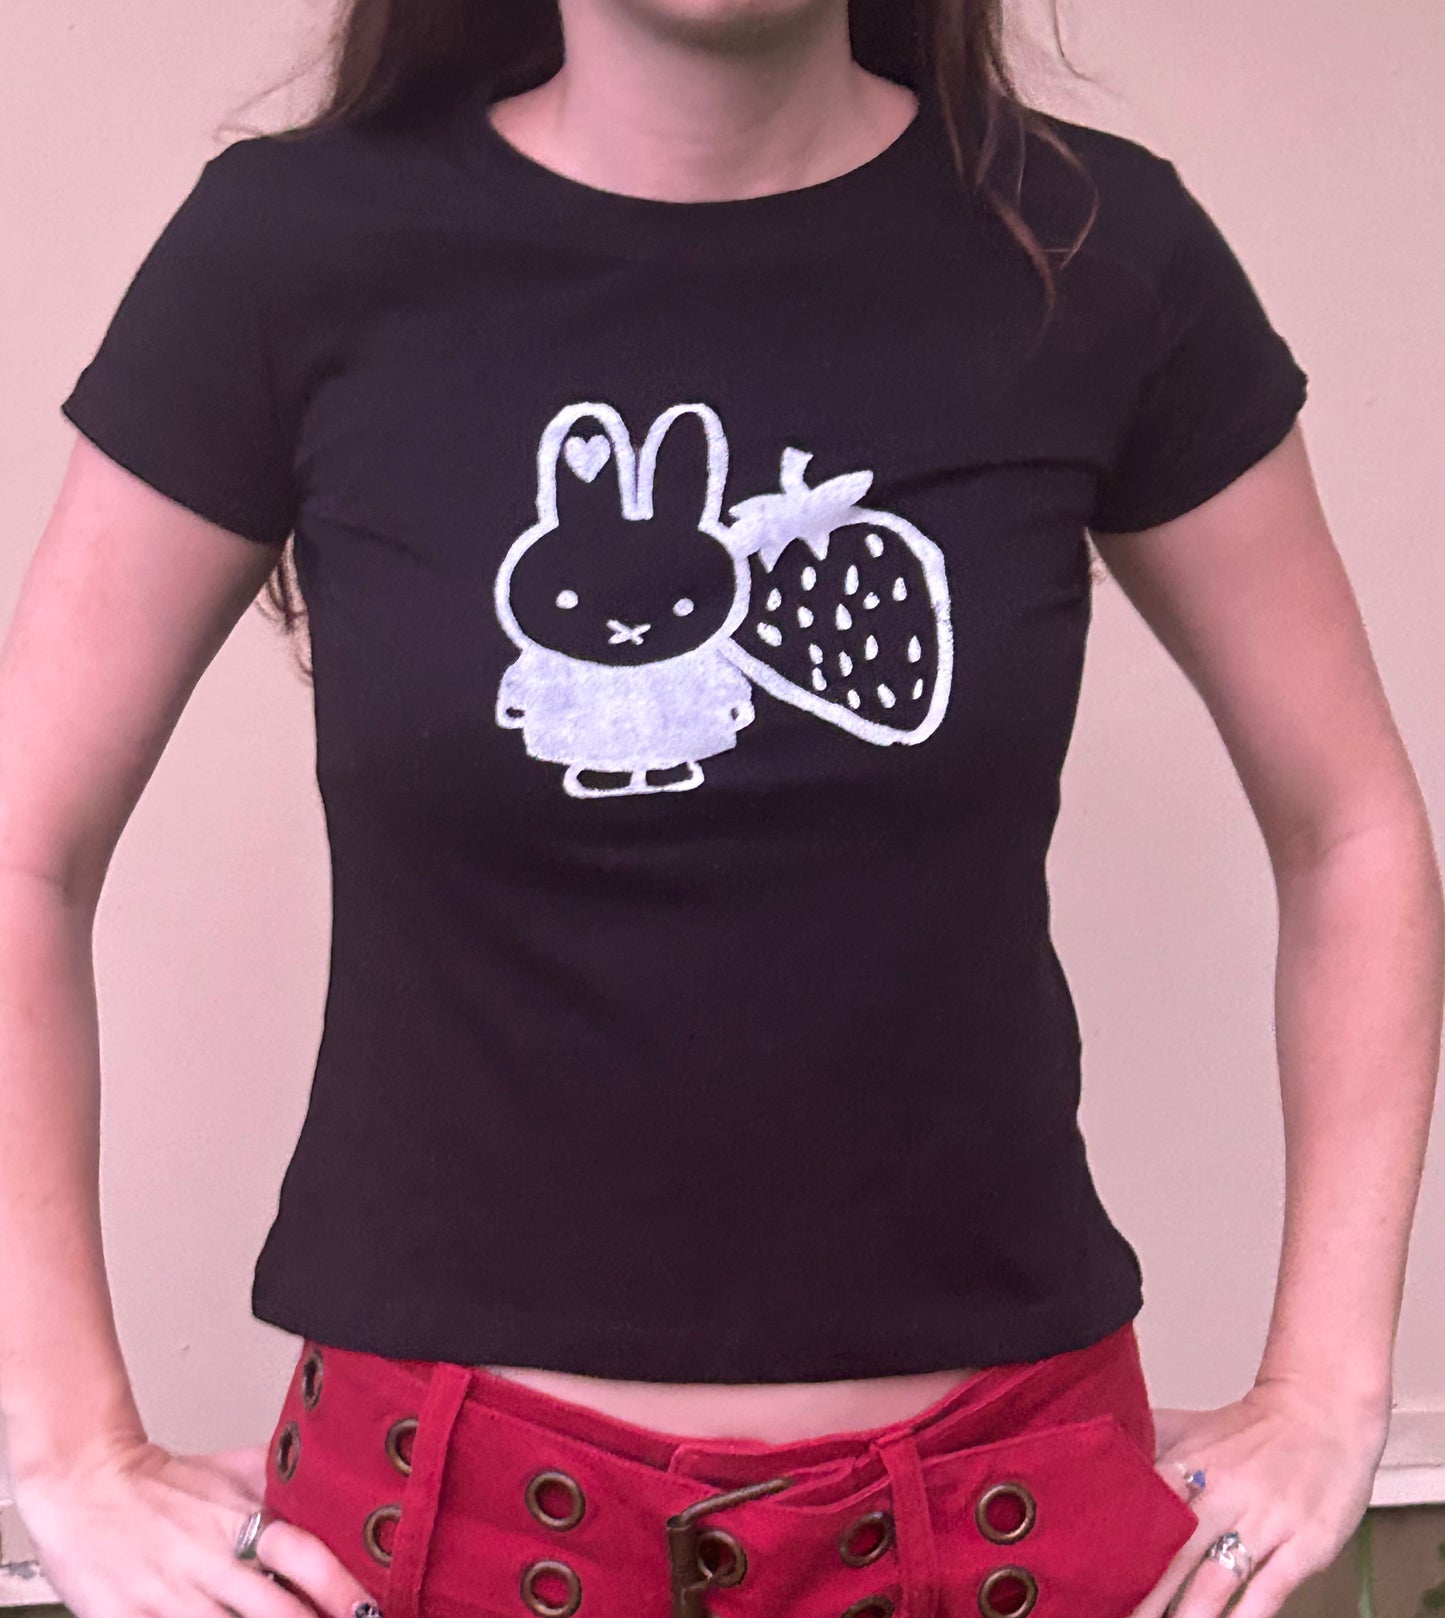 The Strawberry Miffy Baby Tee in red